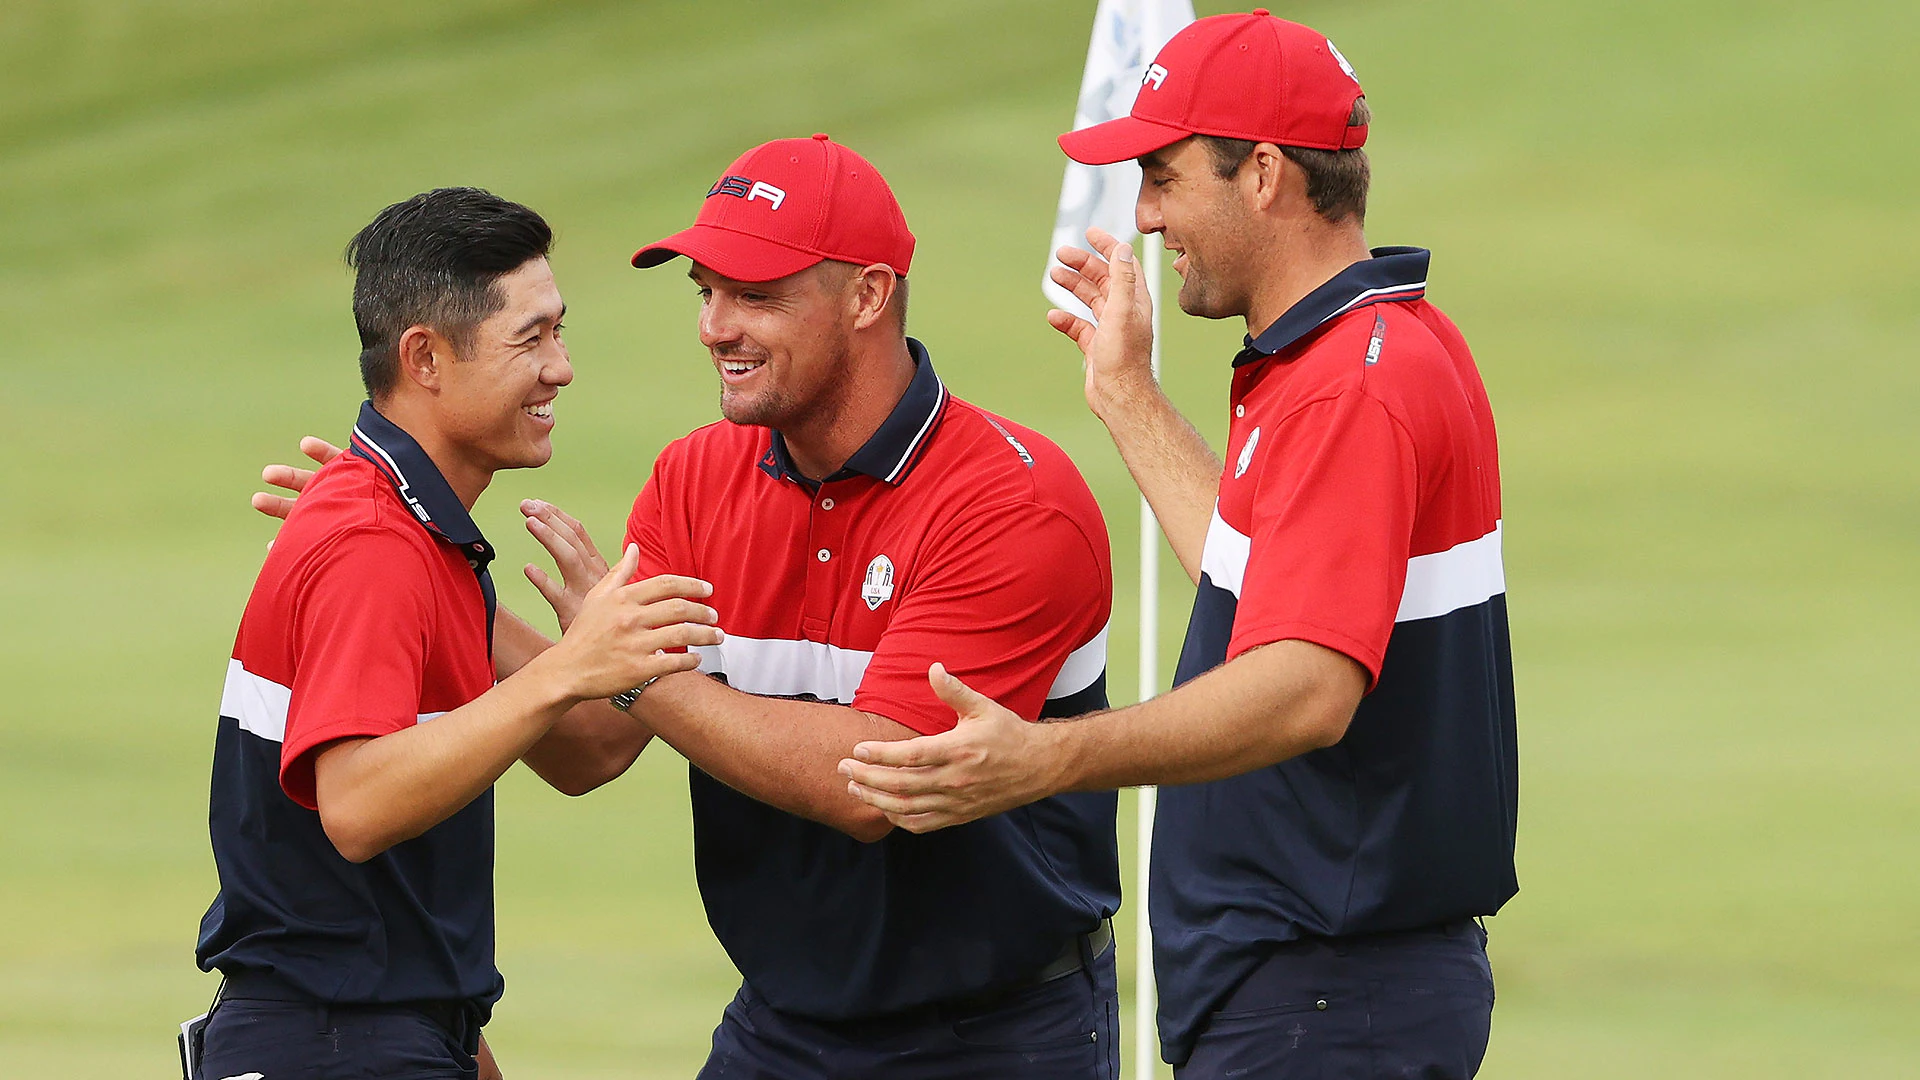 Individual player records for victorious 2020 U.S. Ryder Cup team